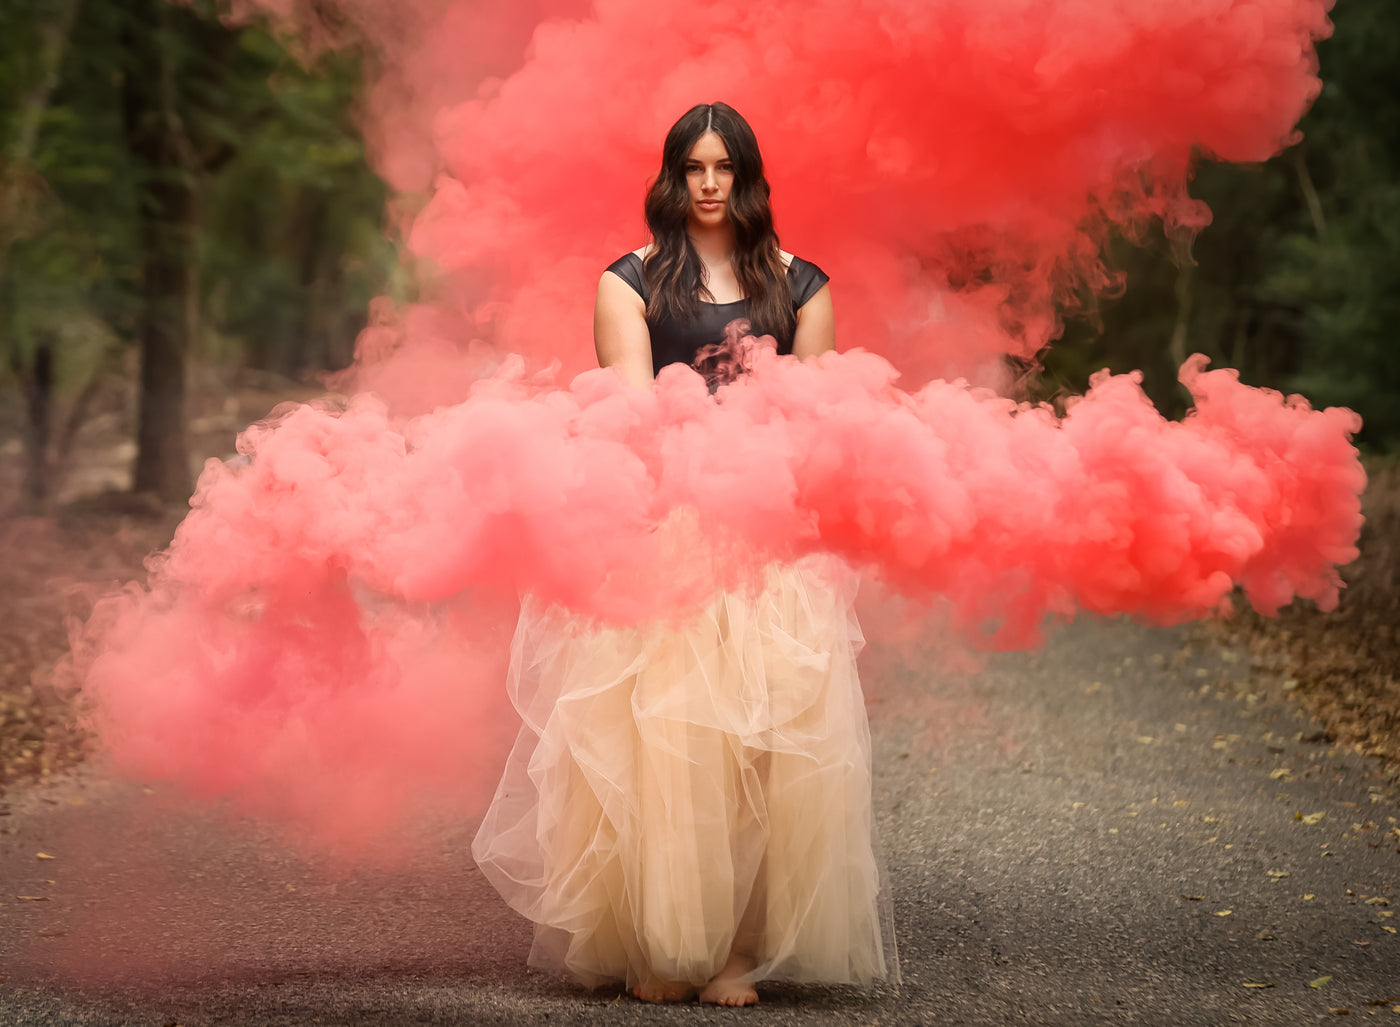 15 Smoke Bomb Photography Ideas for Cool Shots